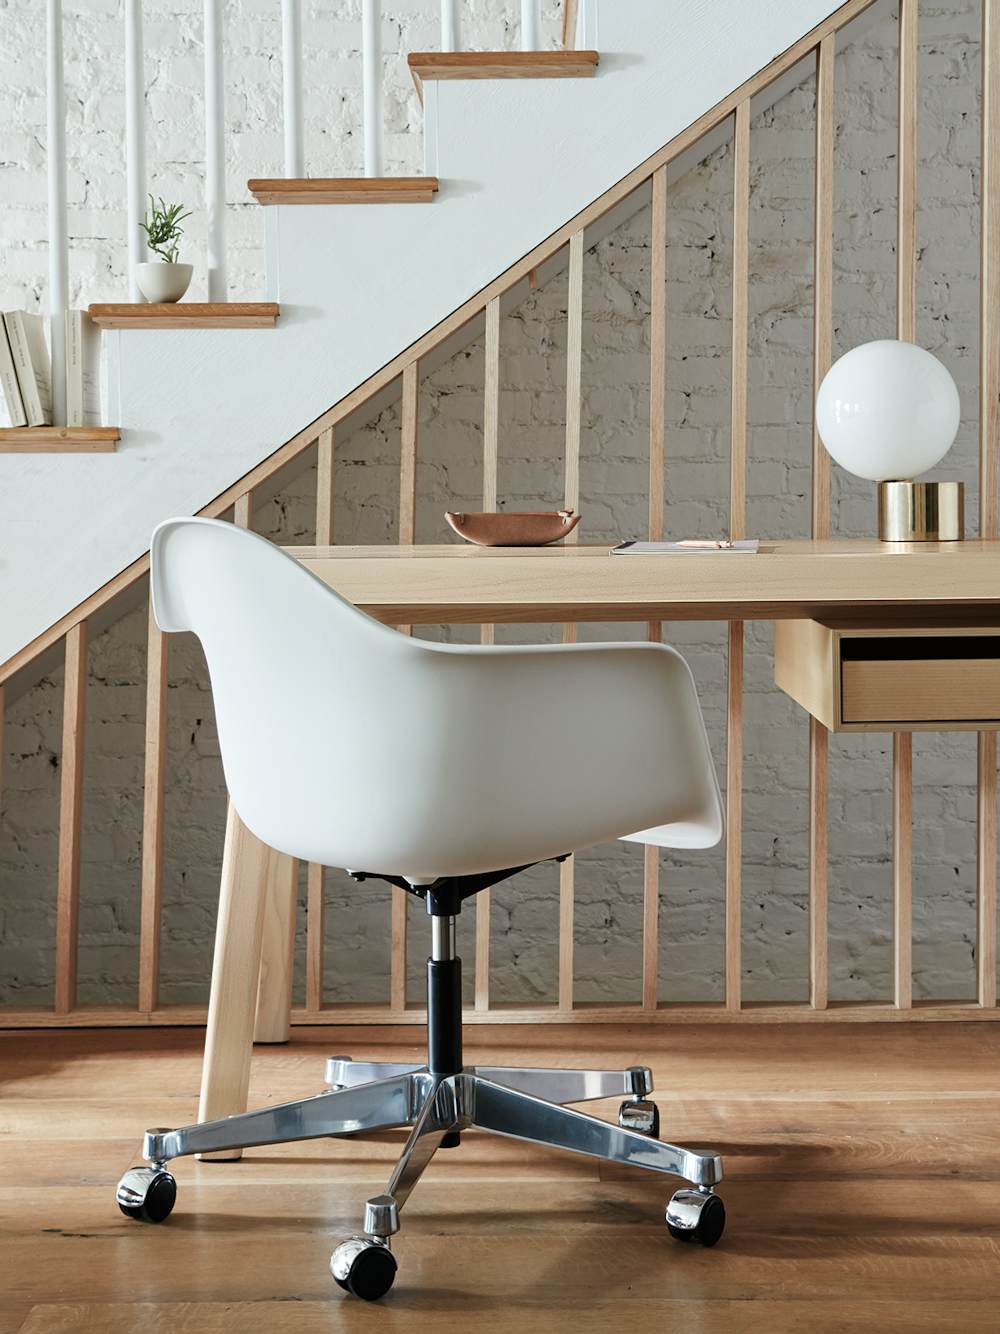 A residential work setting featuring an Eames Task Chair and Distil Desk.